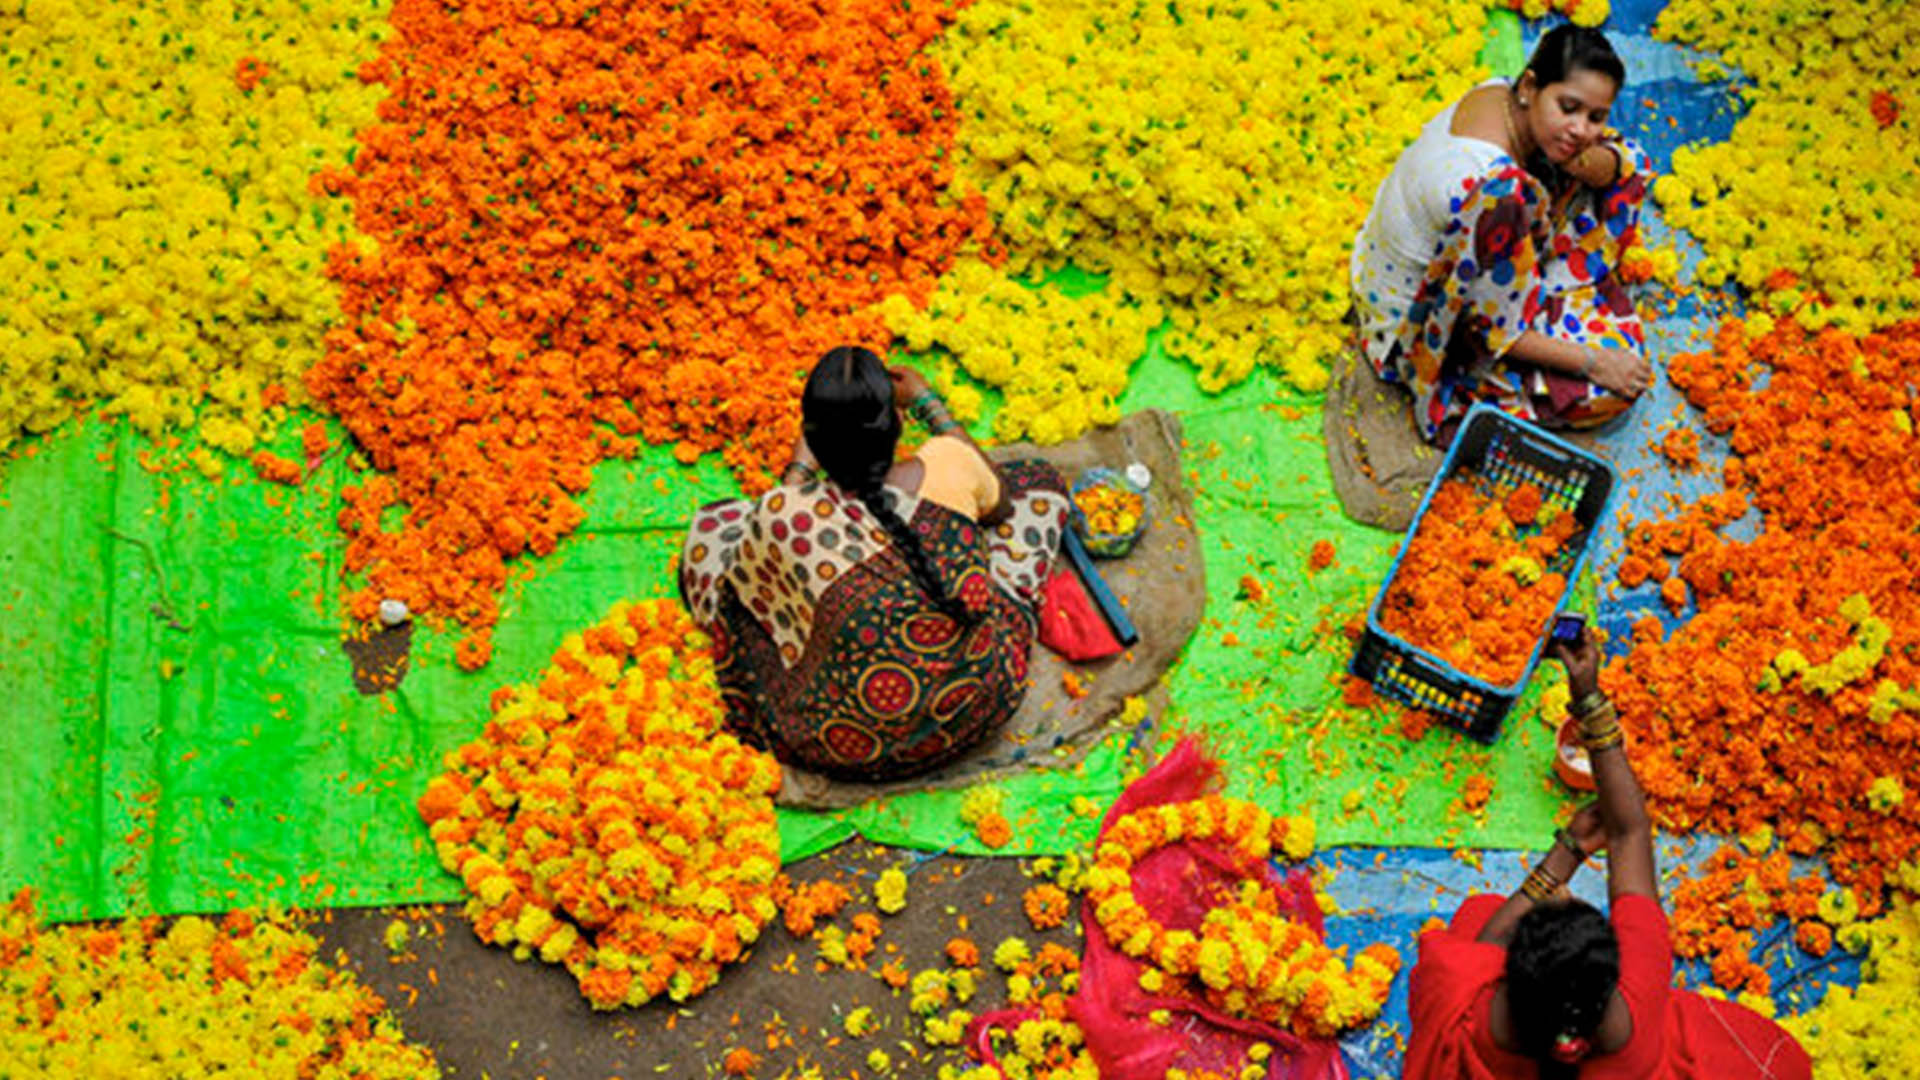 Flower trade worth Rs. 139.5 million during the festival